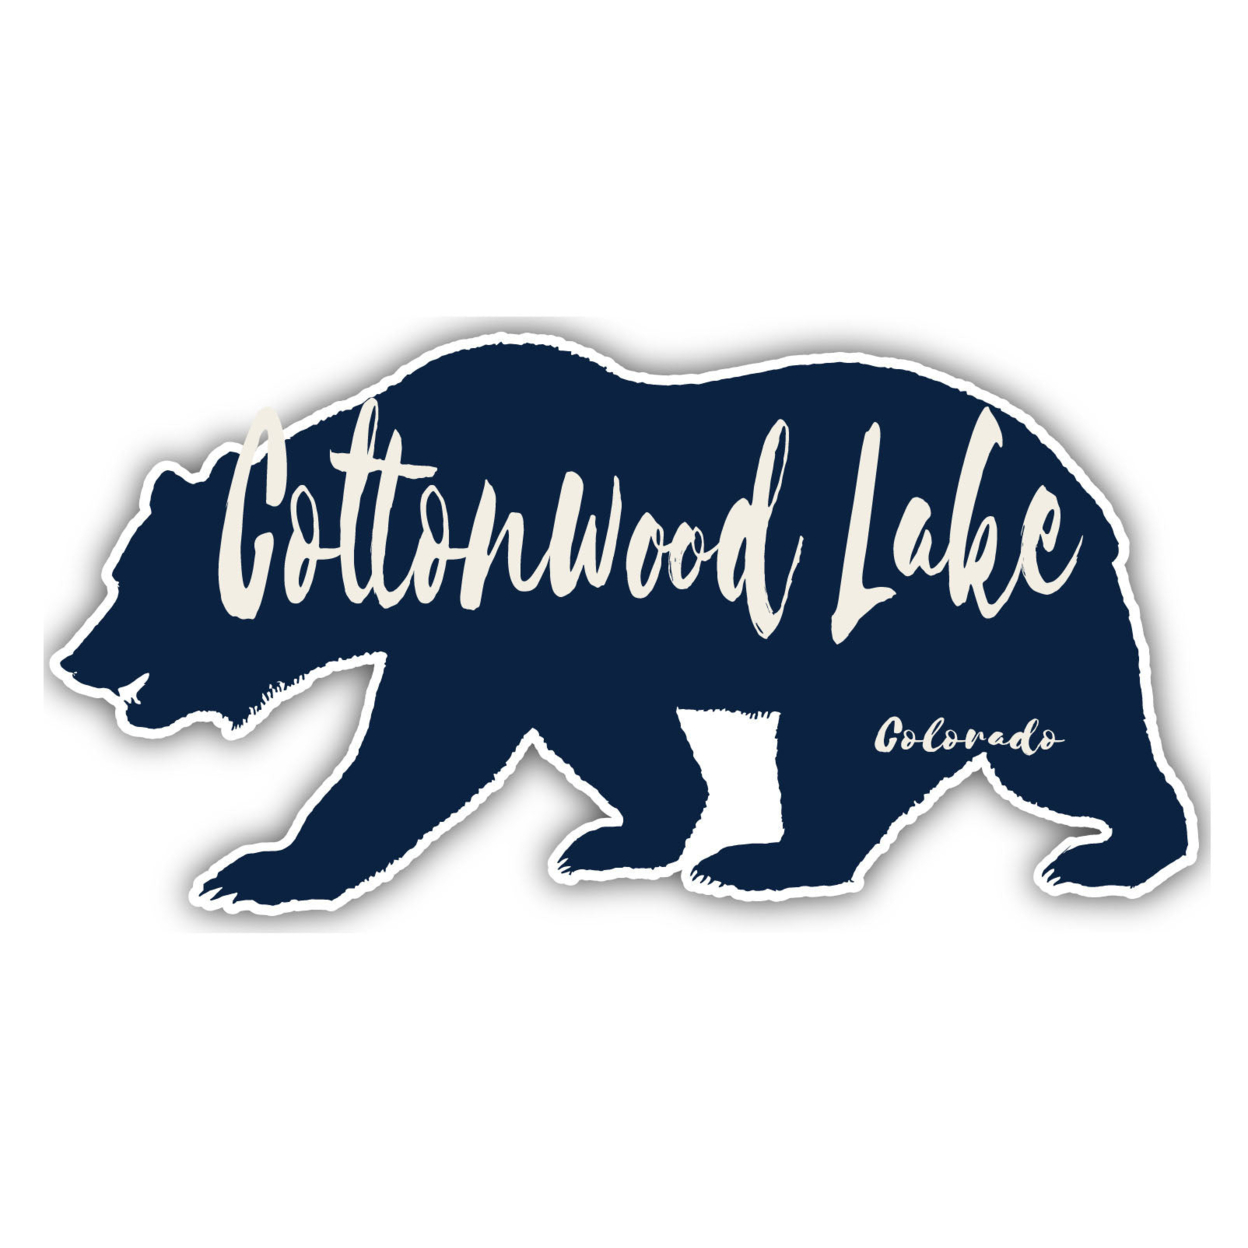 Cottonwood Lake Colorado Souvenir Decorative Stickers (Choose Theme And Size) - 4-Pack, 12-Inch, Camp Life